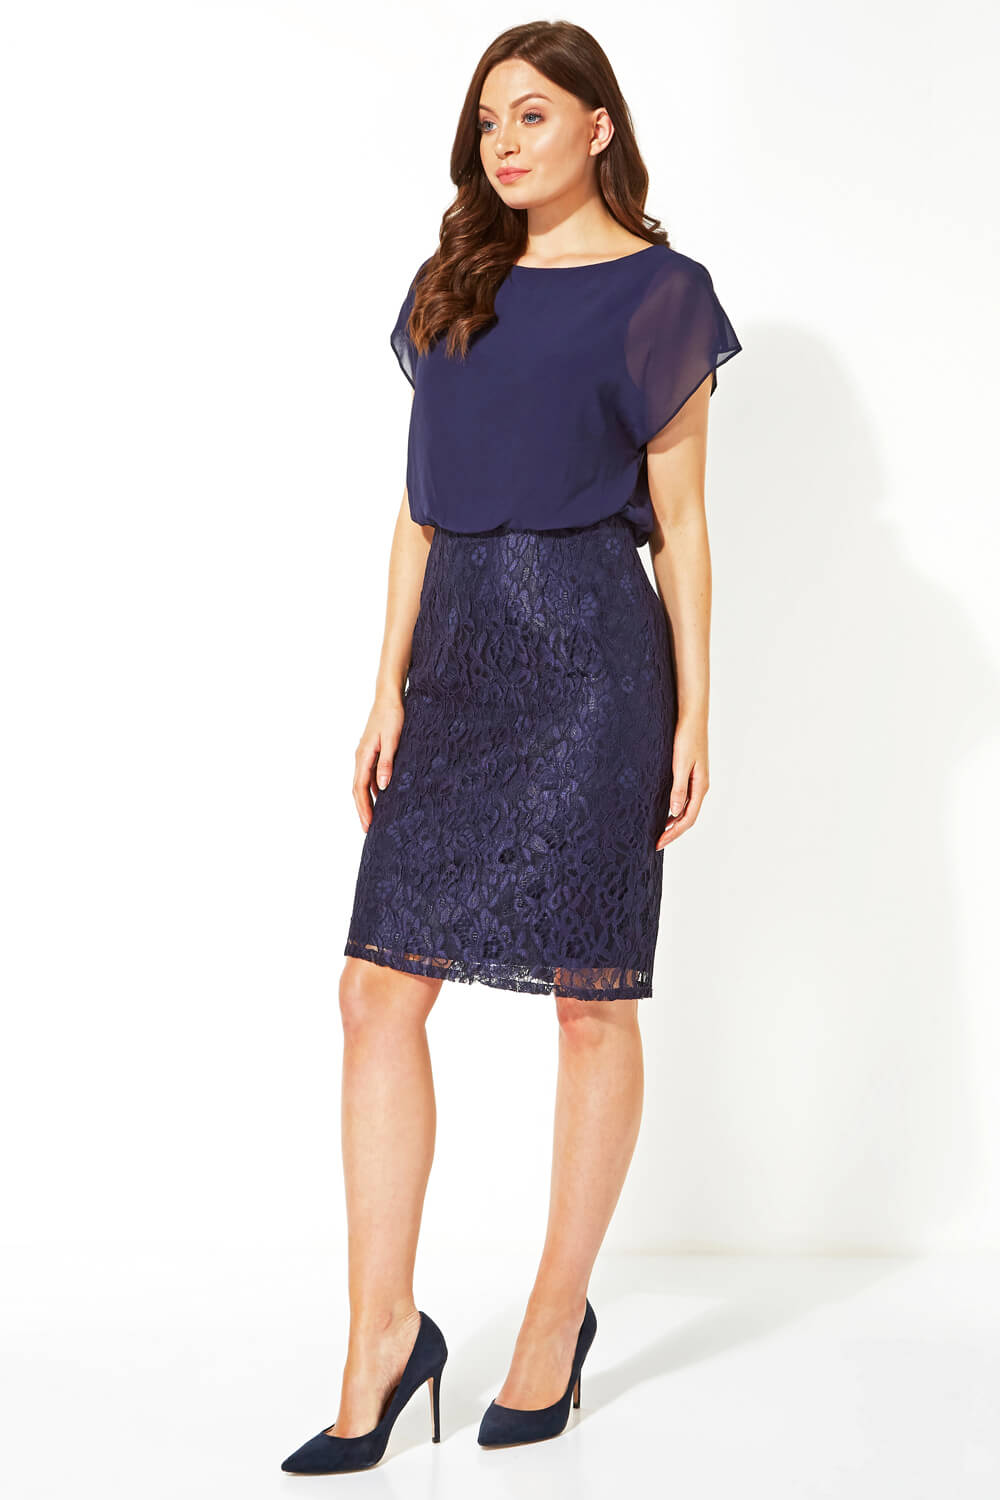 Navy  Chiffon Lace Fitted Dress, Image 2 of 4